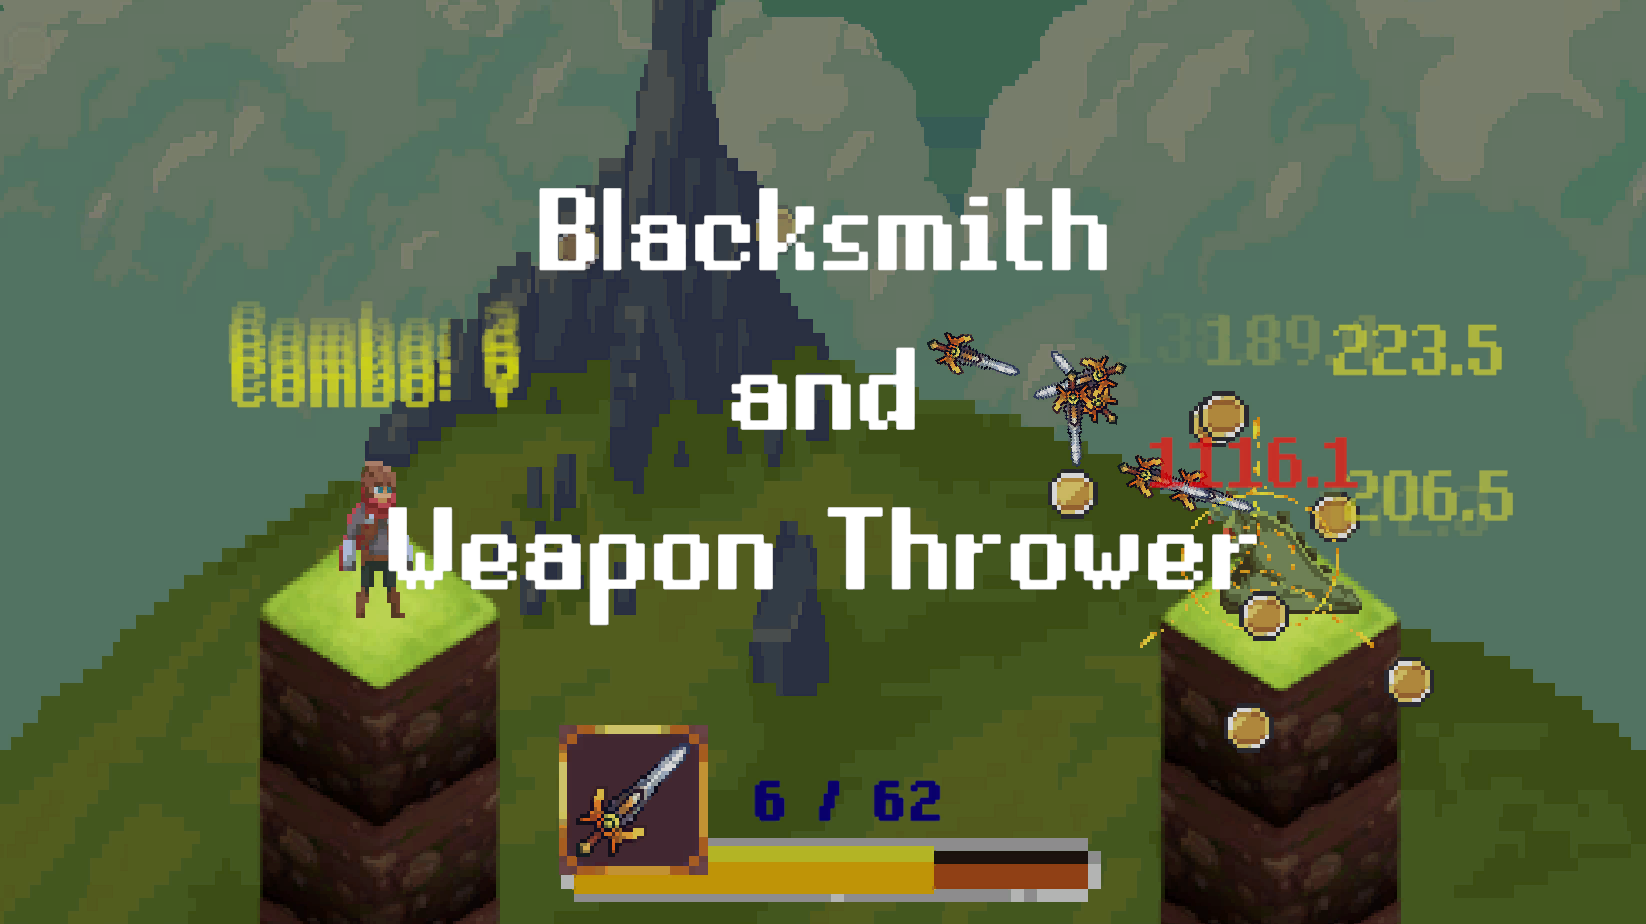 Blacksmith and Weapon Thrower Game Image